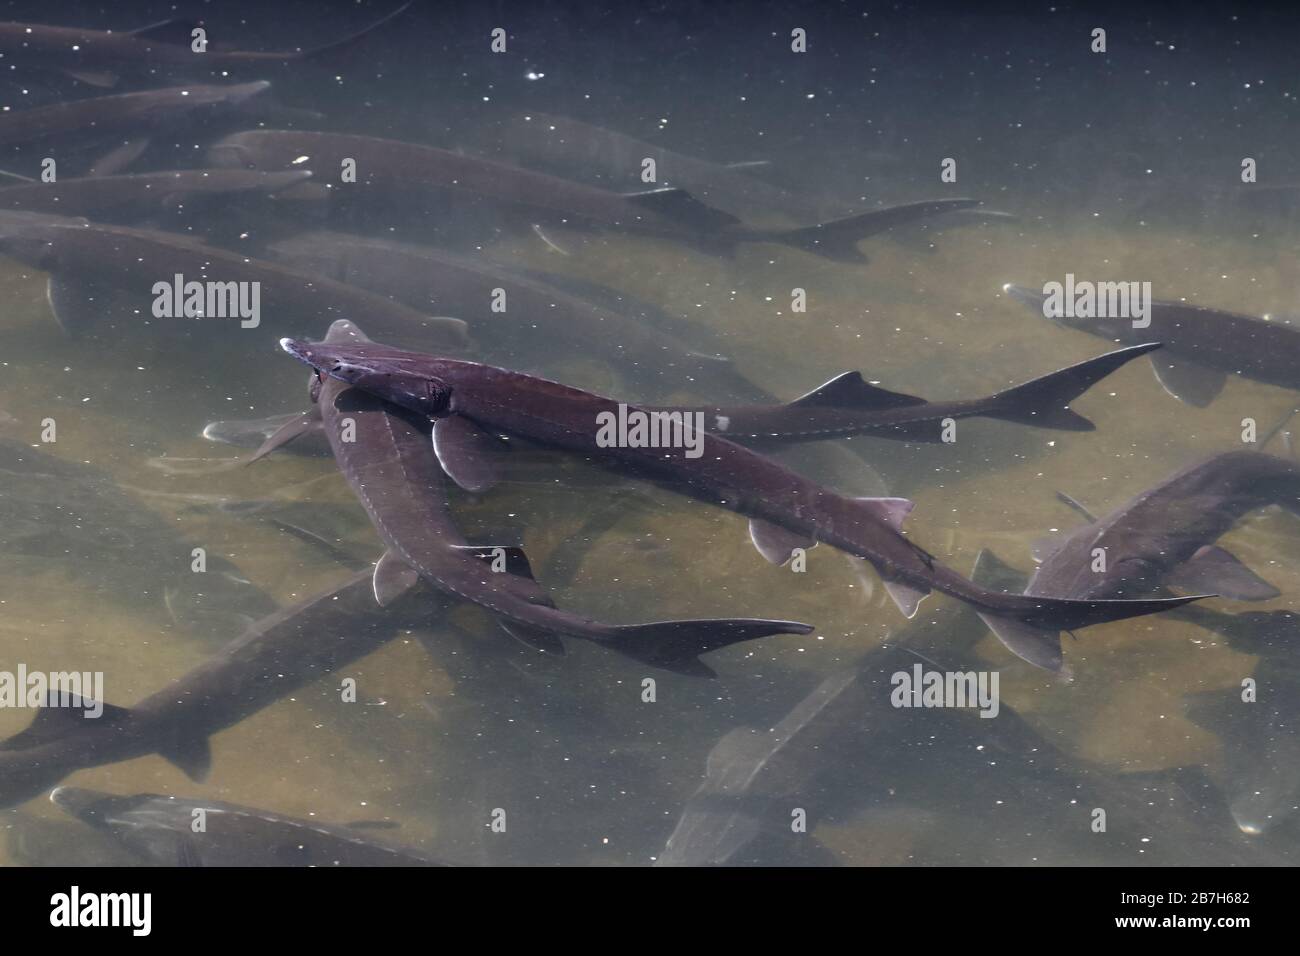 Group of siberian sturgeon (Acipenser baerii) in farm, a source to produce caviar from its roe and tasty meat. Freshwater fish shape look like shark. Stock Photo